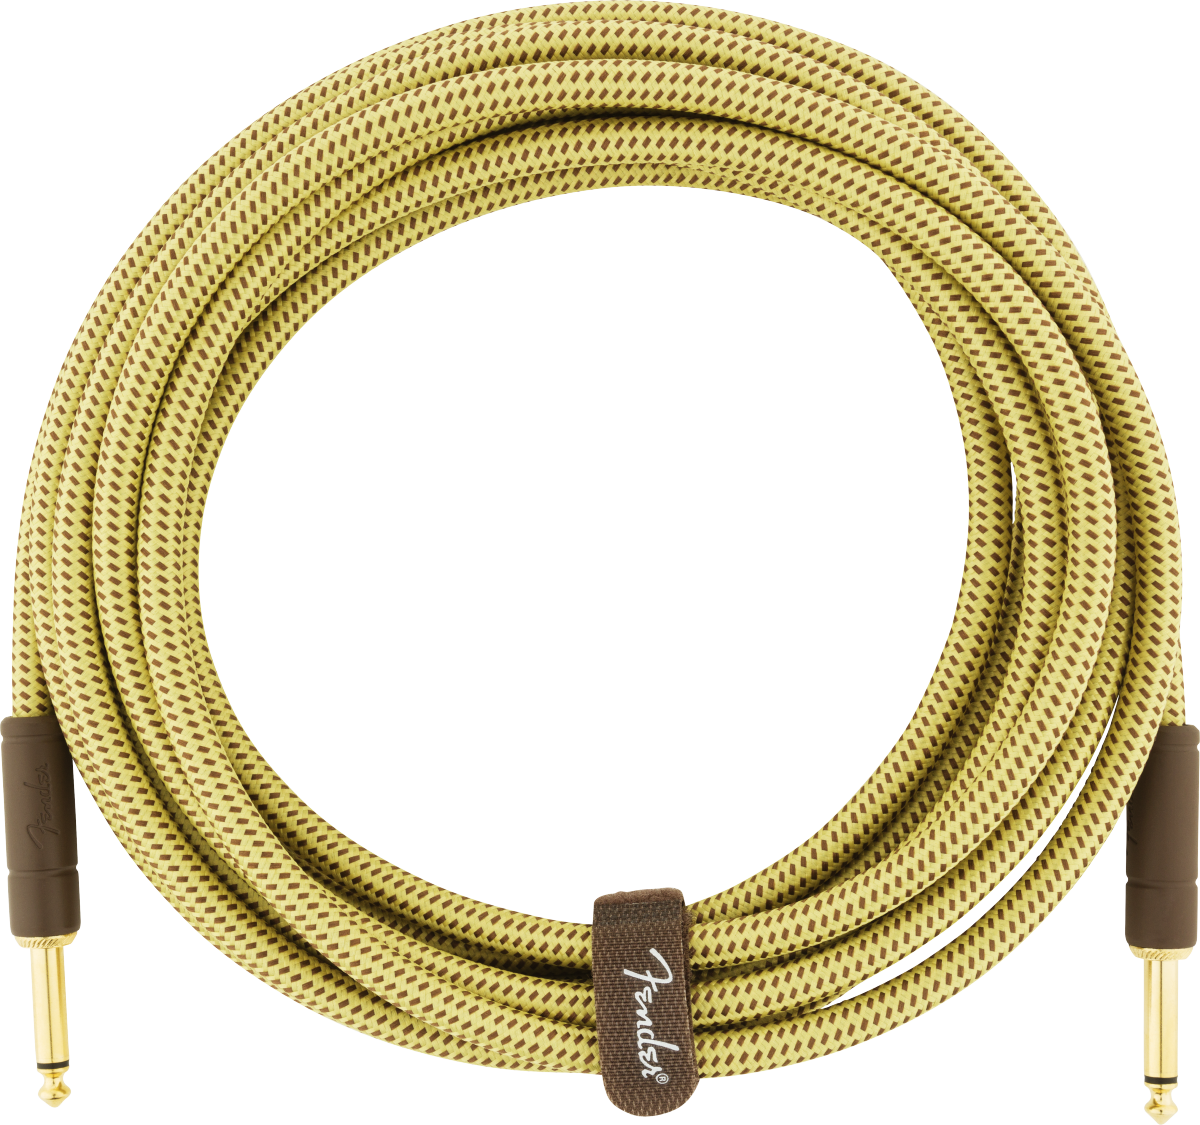 FENDER DELUXE INSTRUMENT CABLE 15FT - STRAIGHT TWEED